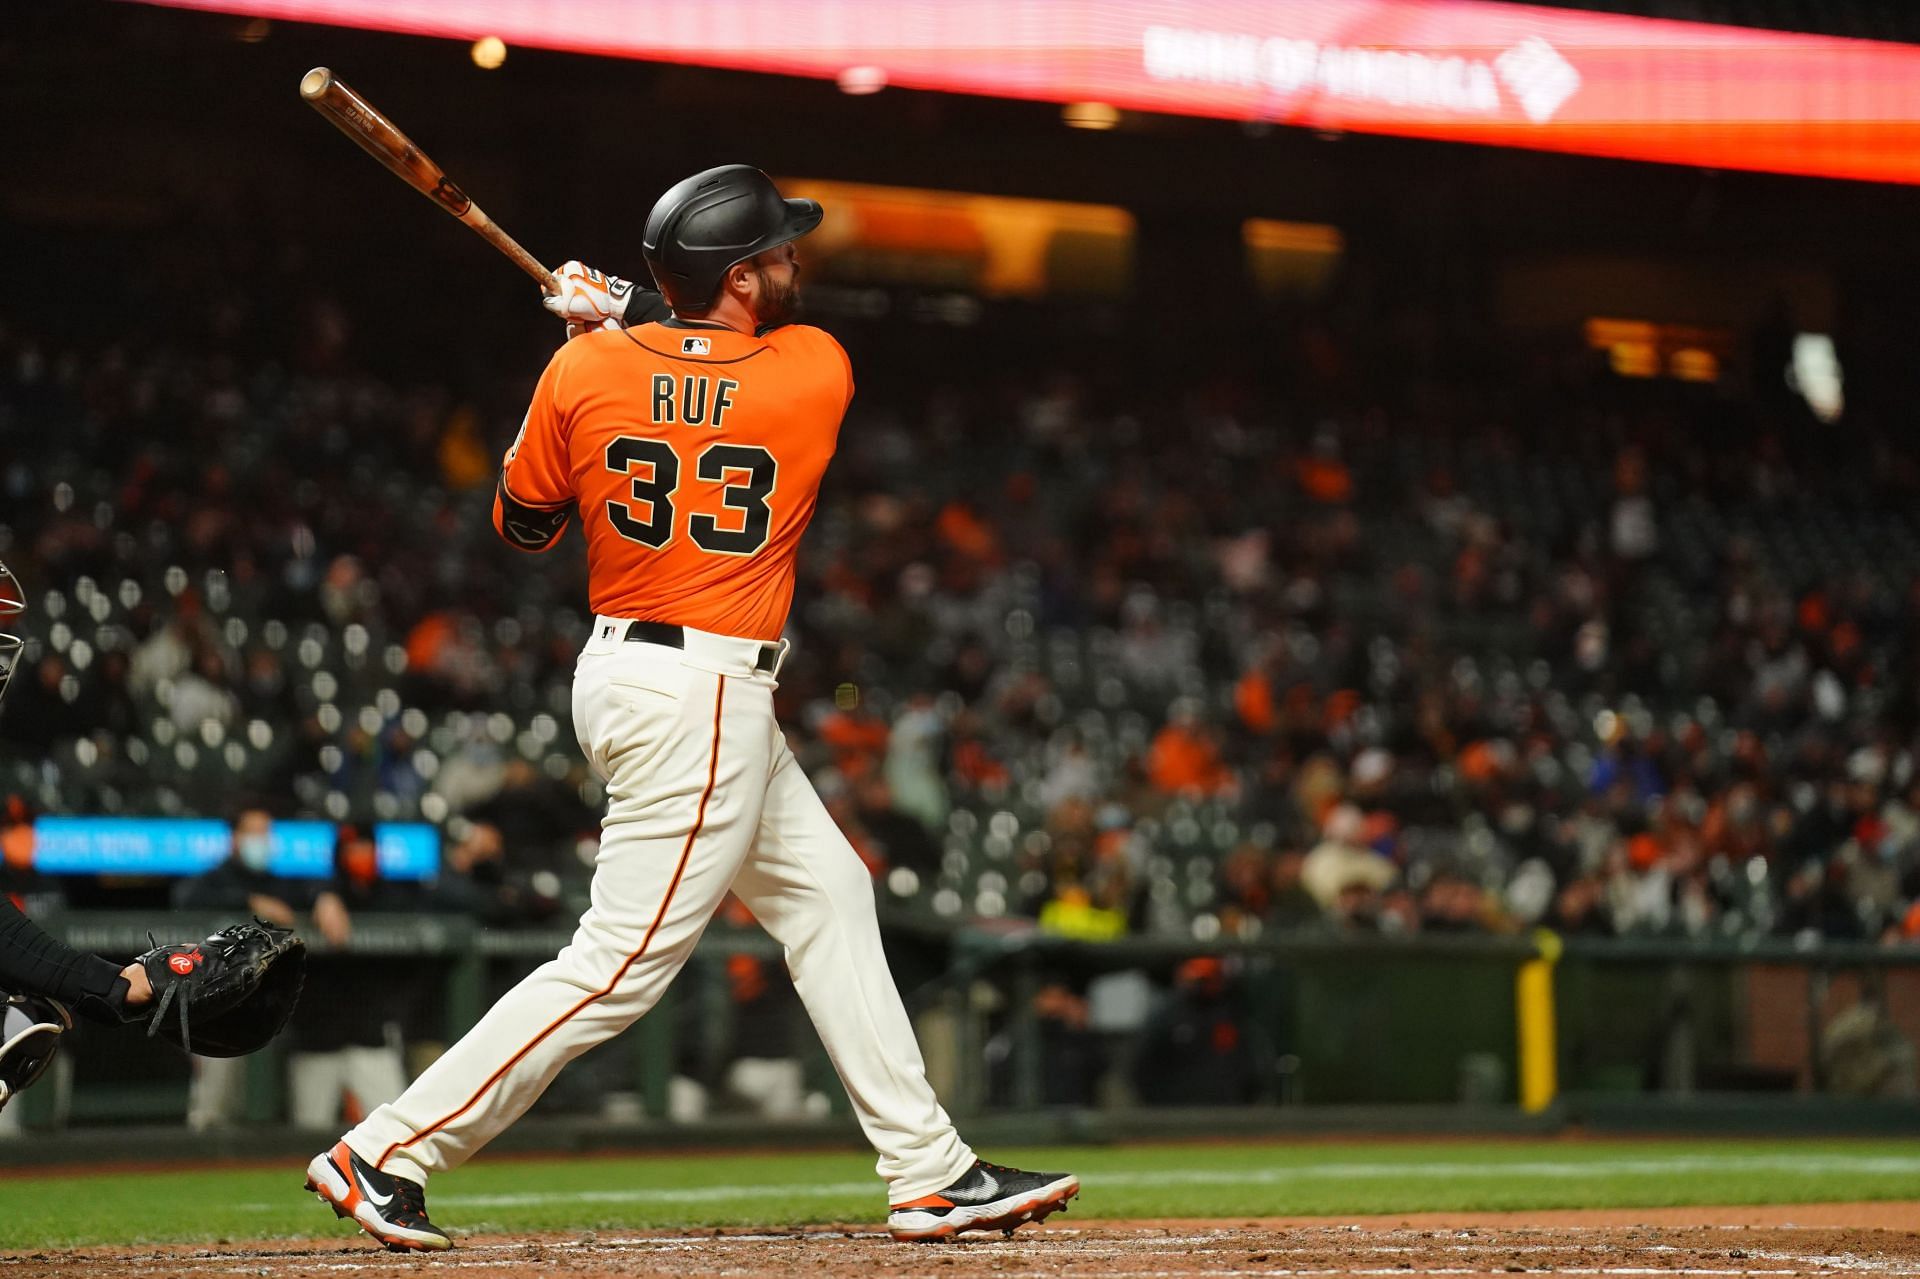 Darin Ruf #33 of the San Francisco Giants bats during the game against the Miami Marlins at Oracle Park on April 23, 2021 in San Francisco, California.